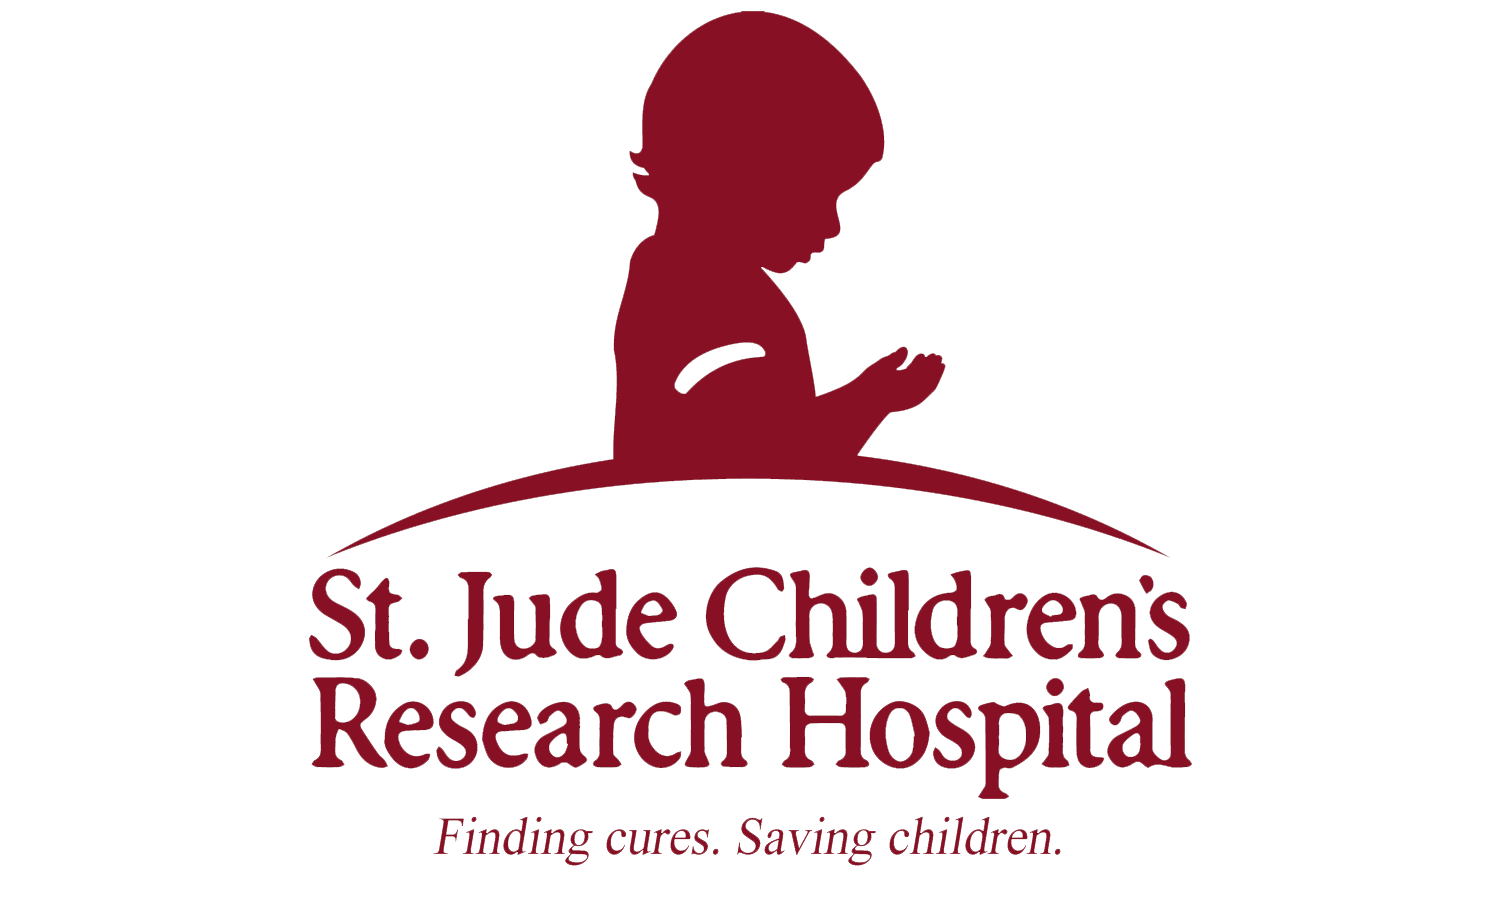 St Jude Childrens research hospital logo